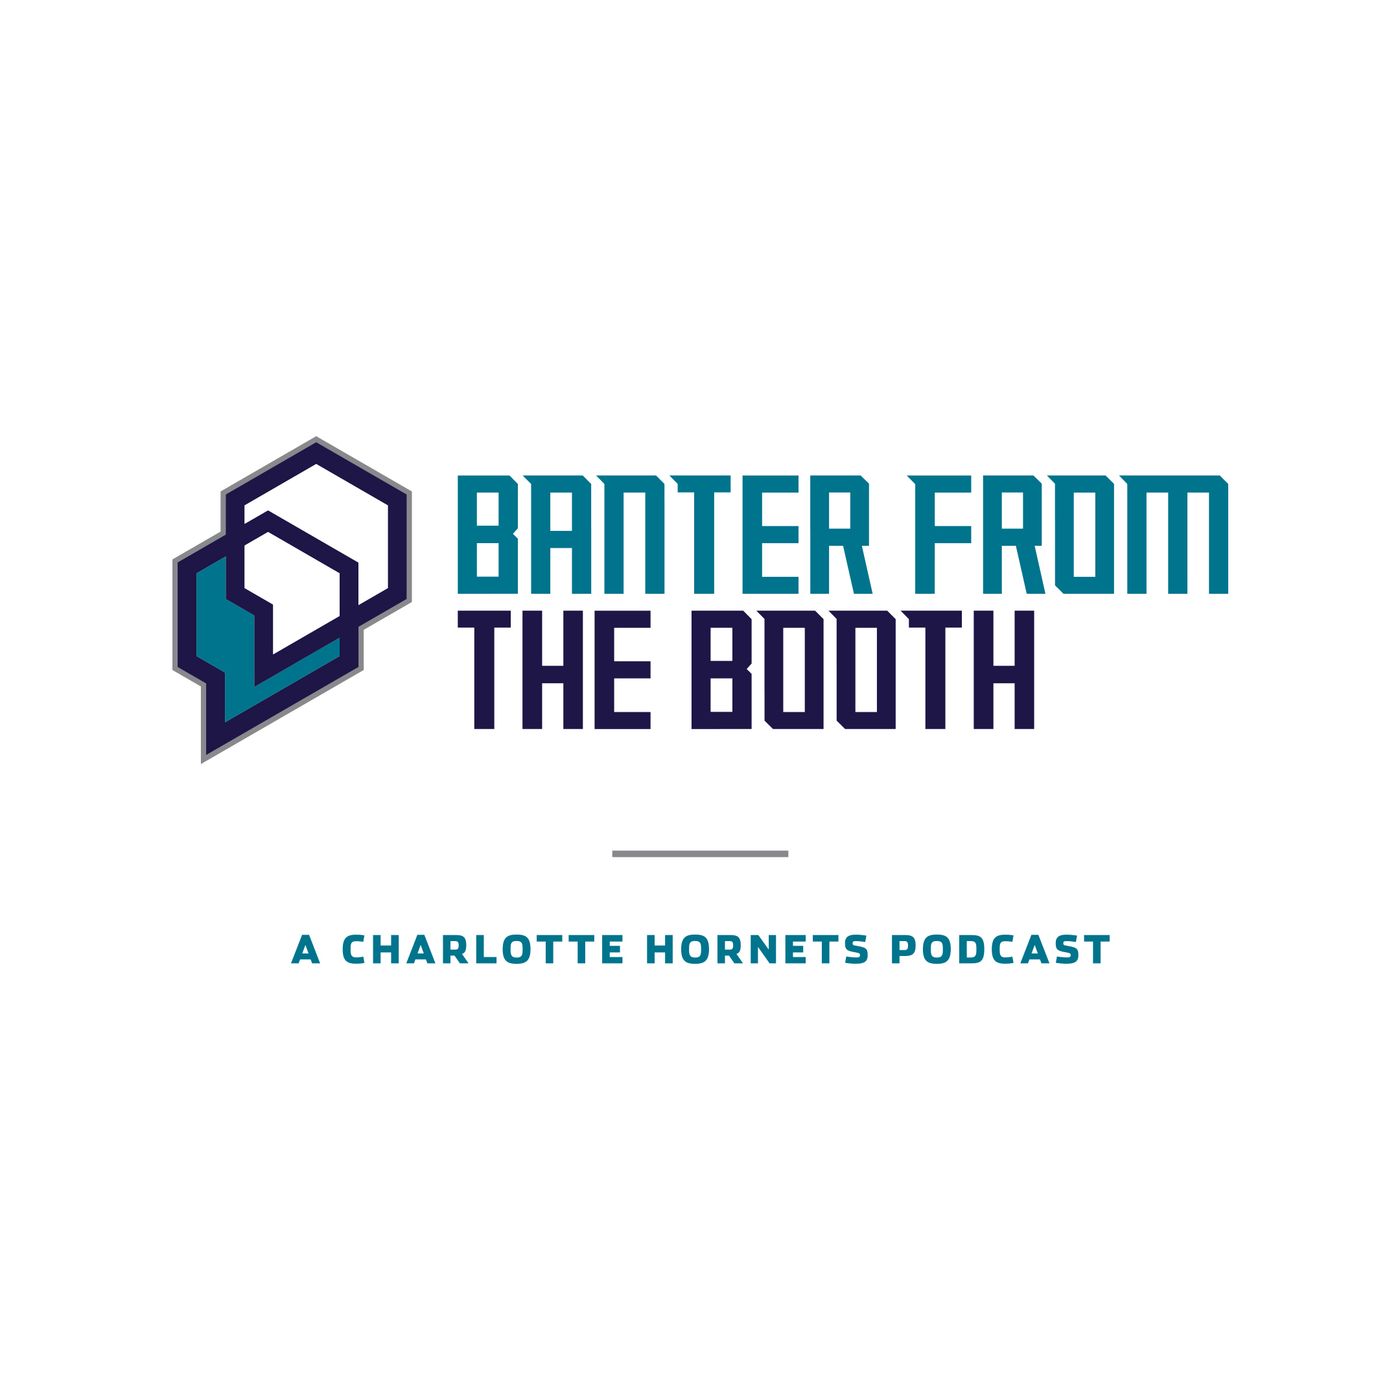 Banter From The Booth podcast